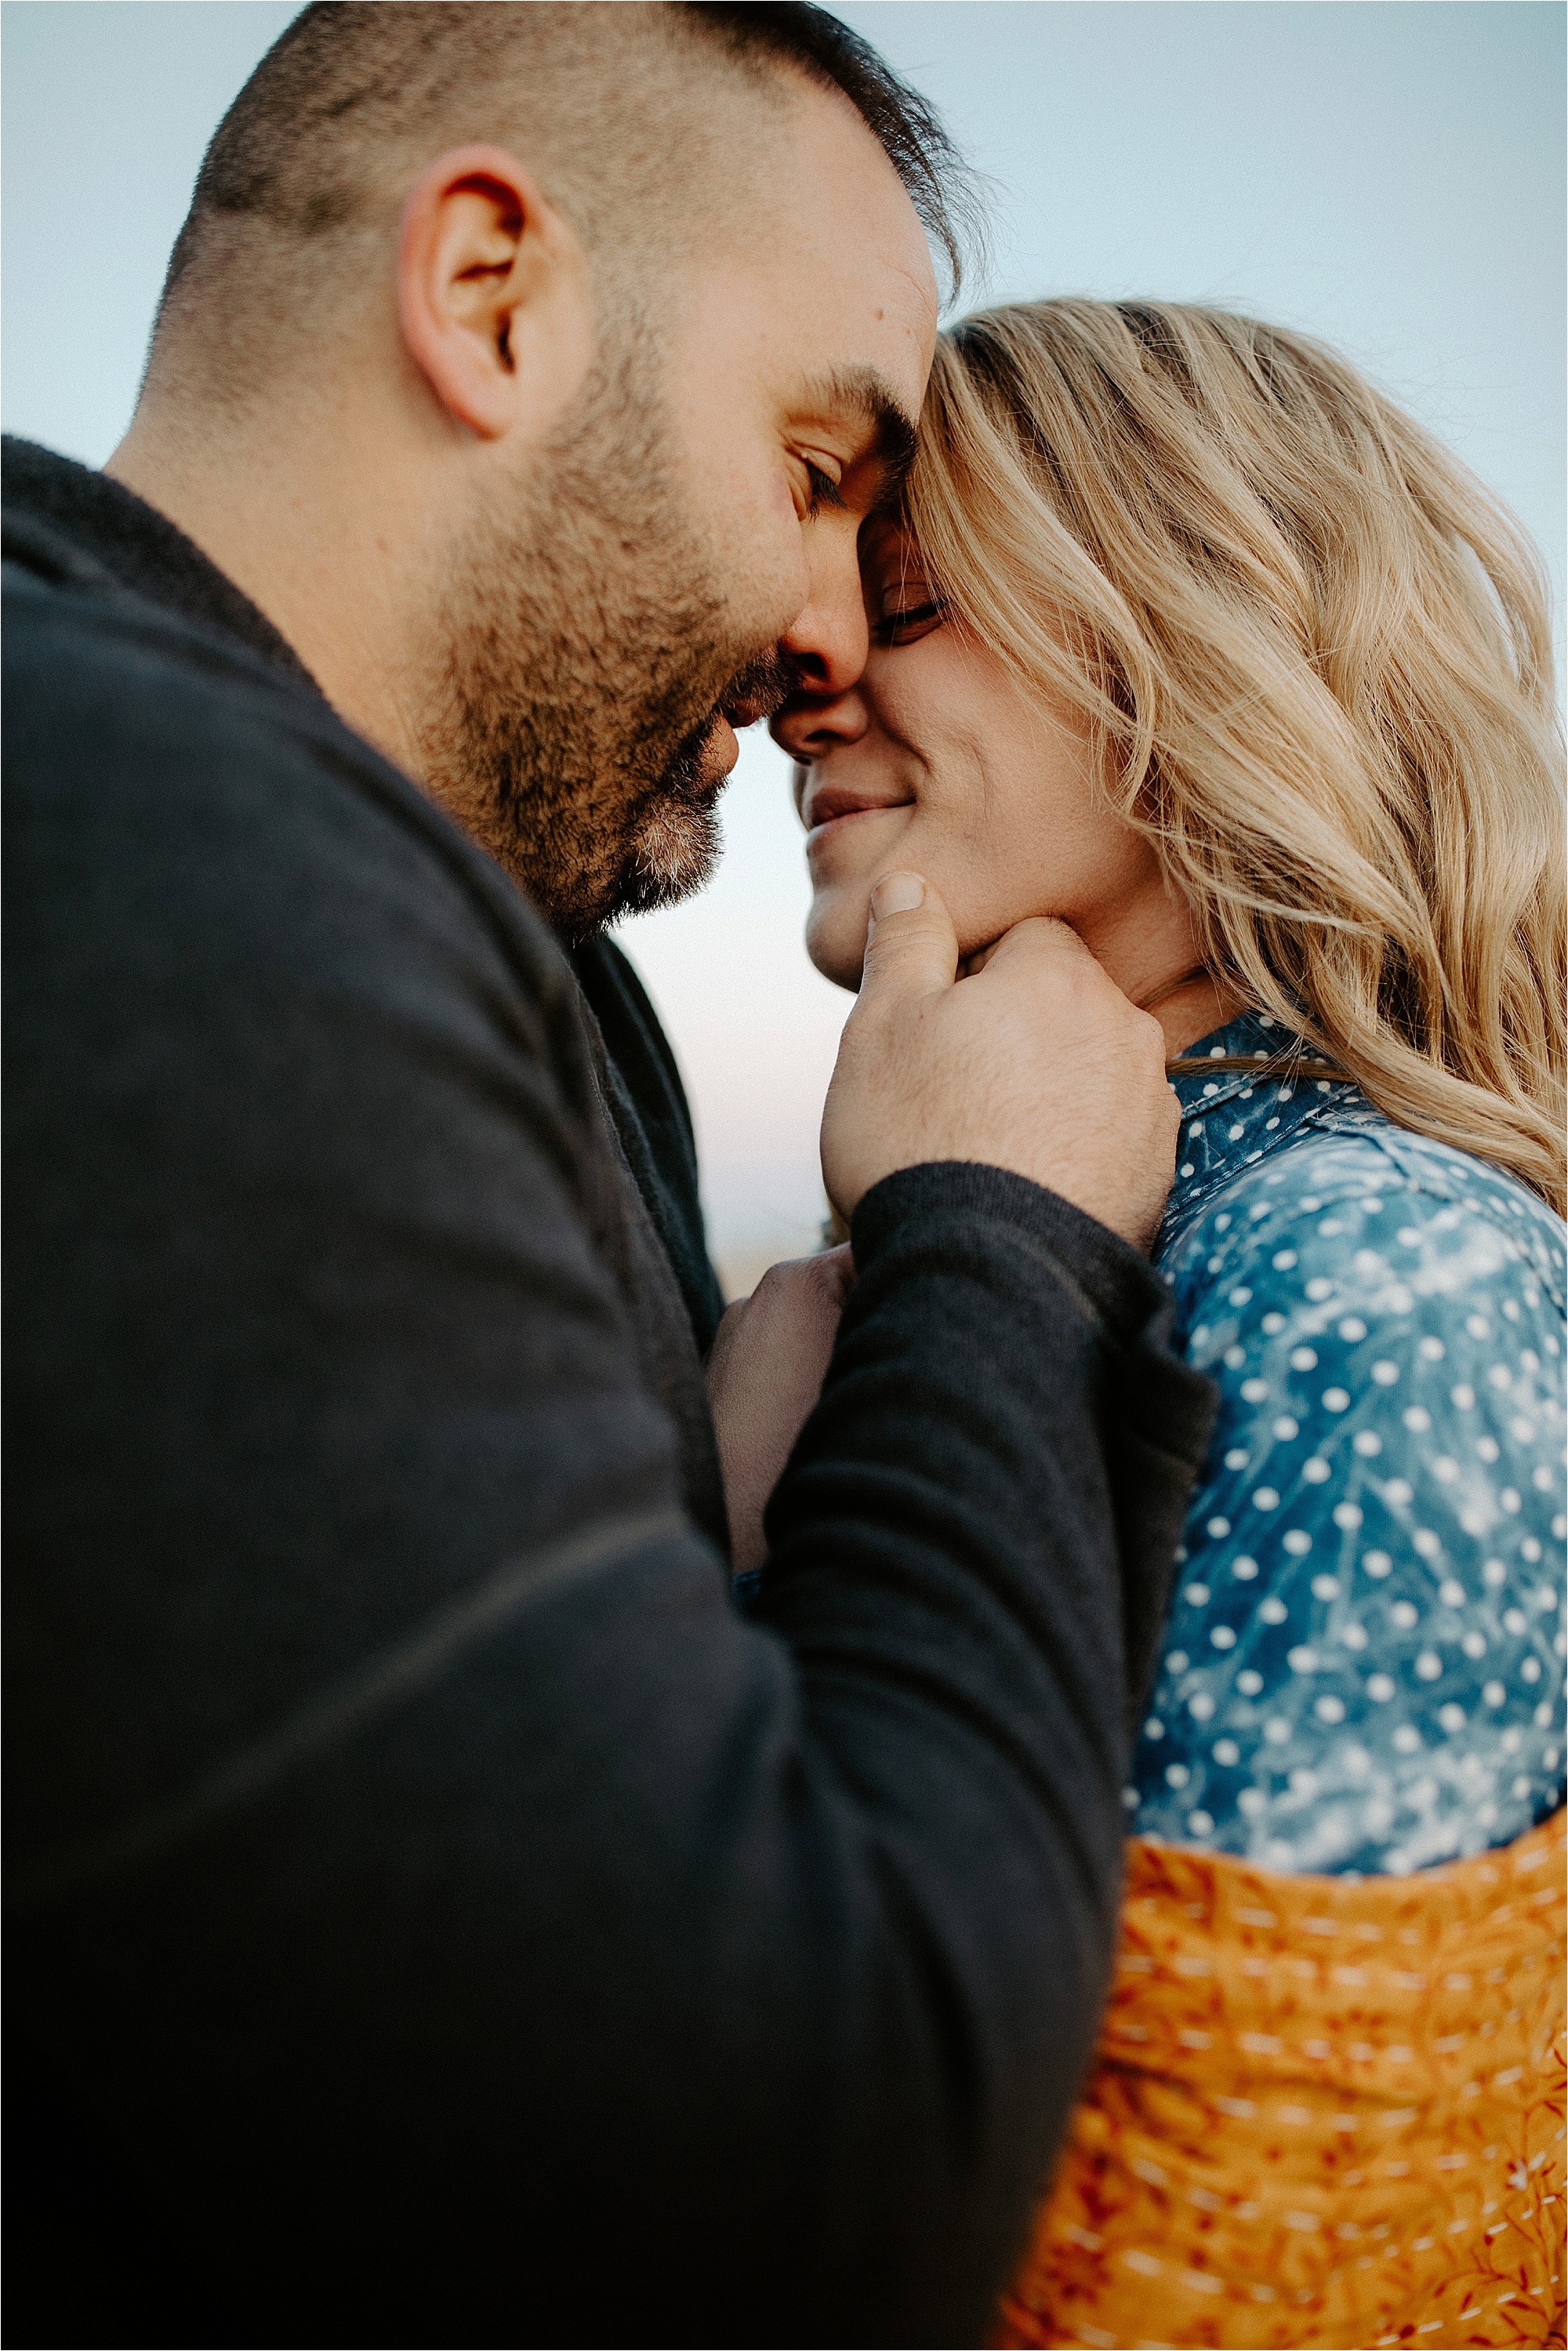 Sunset engagement session in the country of Kankakee, IL. Krystal Richmond is a natural light Engagement and Wedding Photographer in the Chicagoland area. 